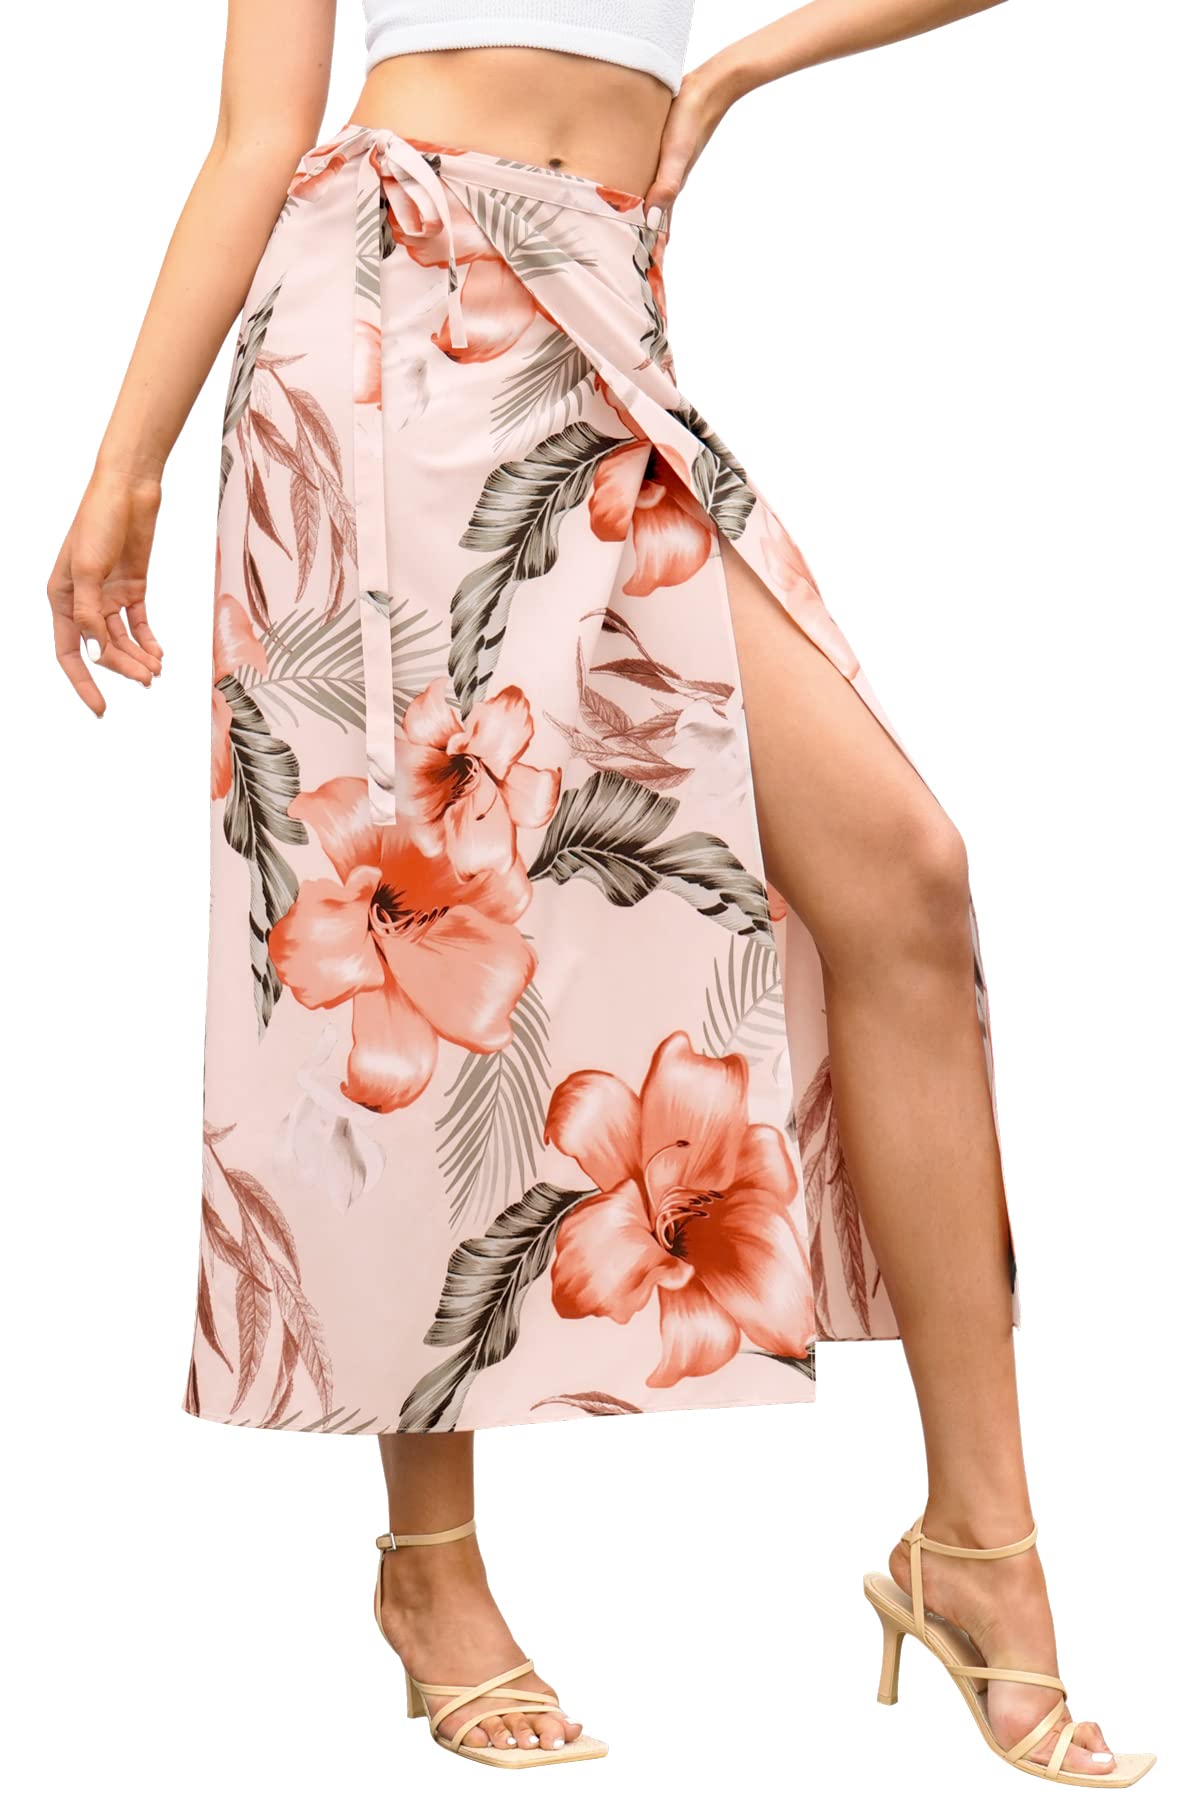 DJT High Waisted Wrap Skirt FASHION Apricot Floral Womens Boho Floral Summer Beach Tie Up Skirts